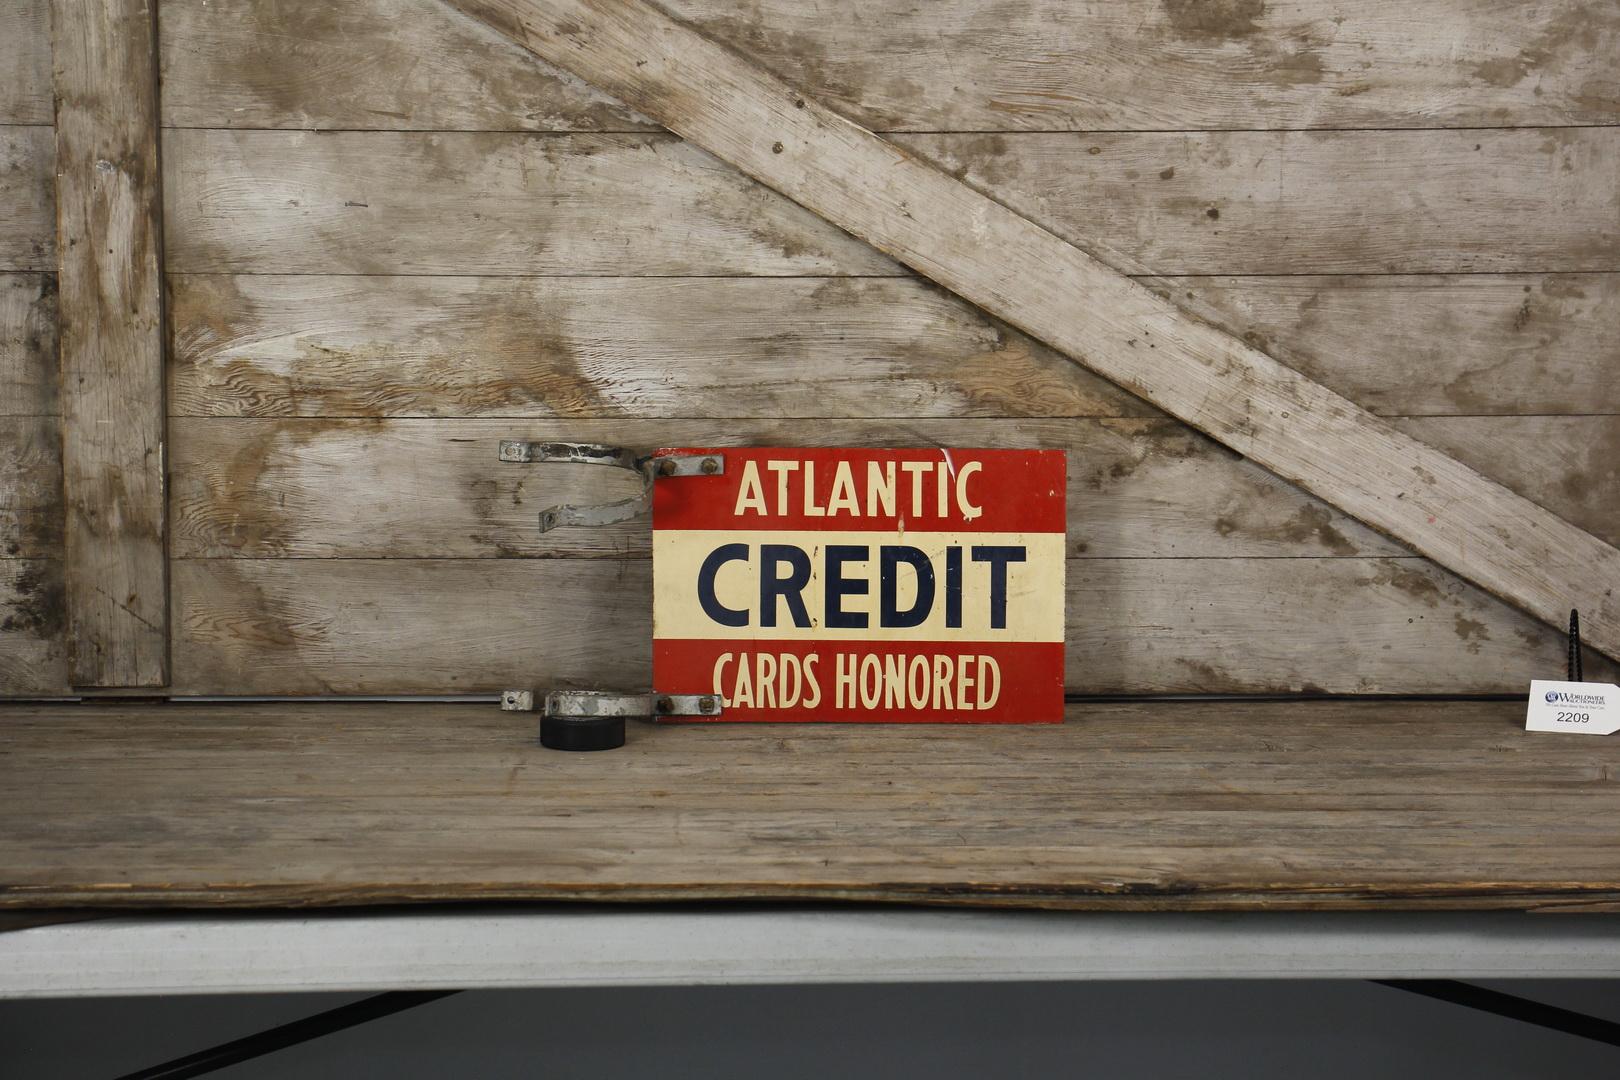 Atlantic Credit Cards Honored Flange Sign